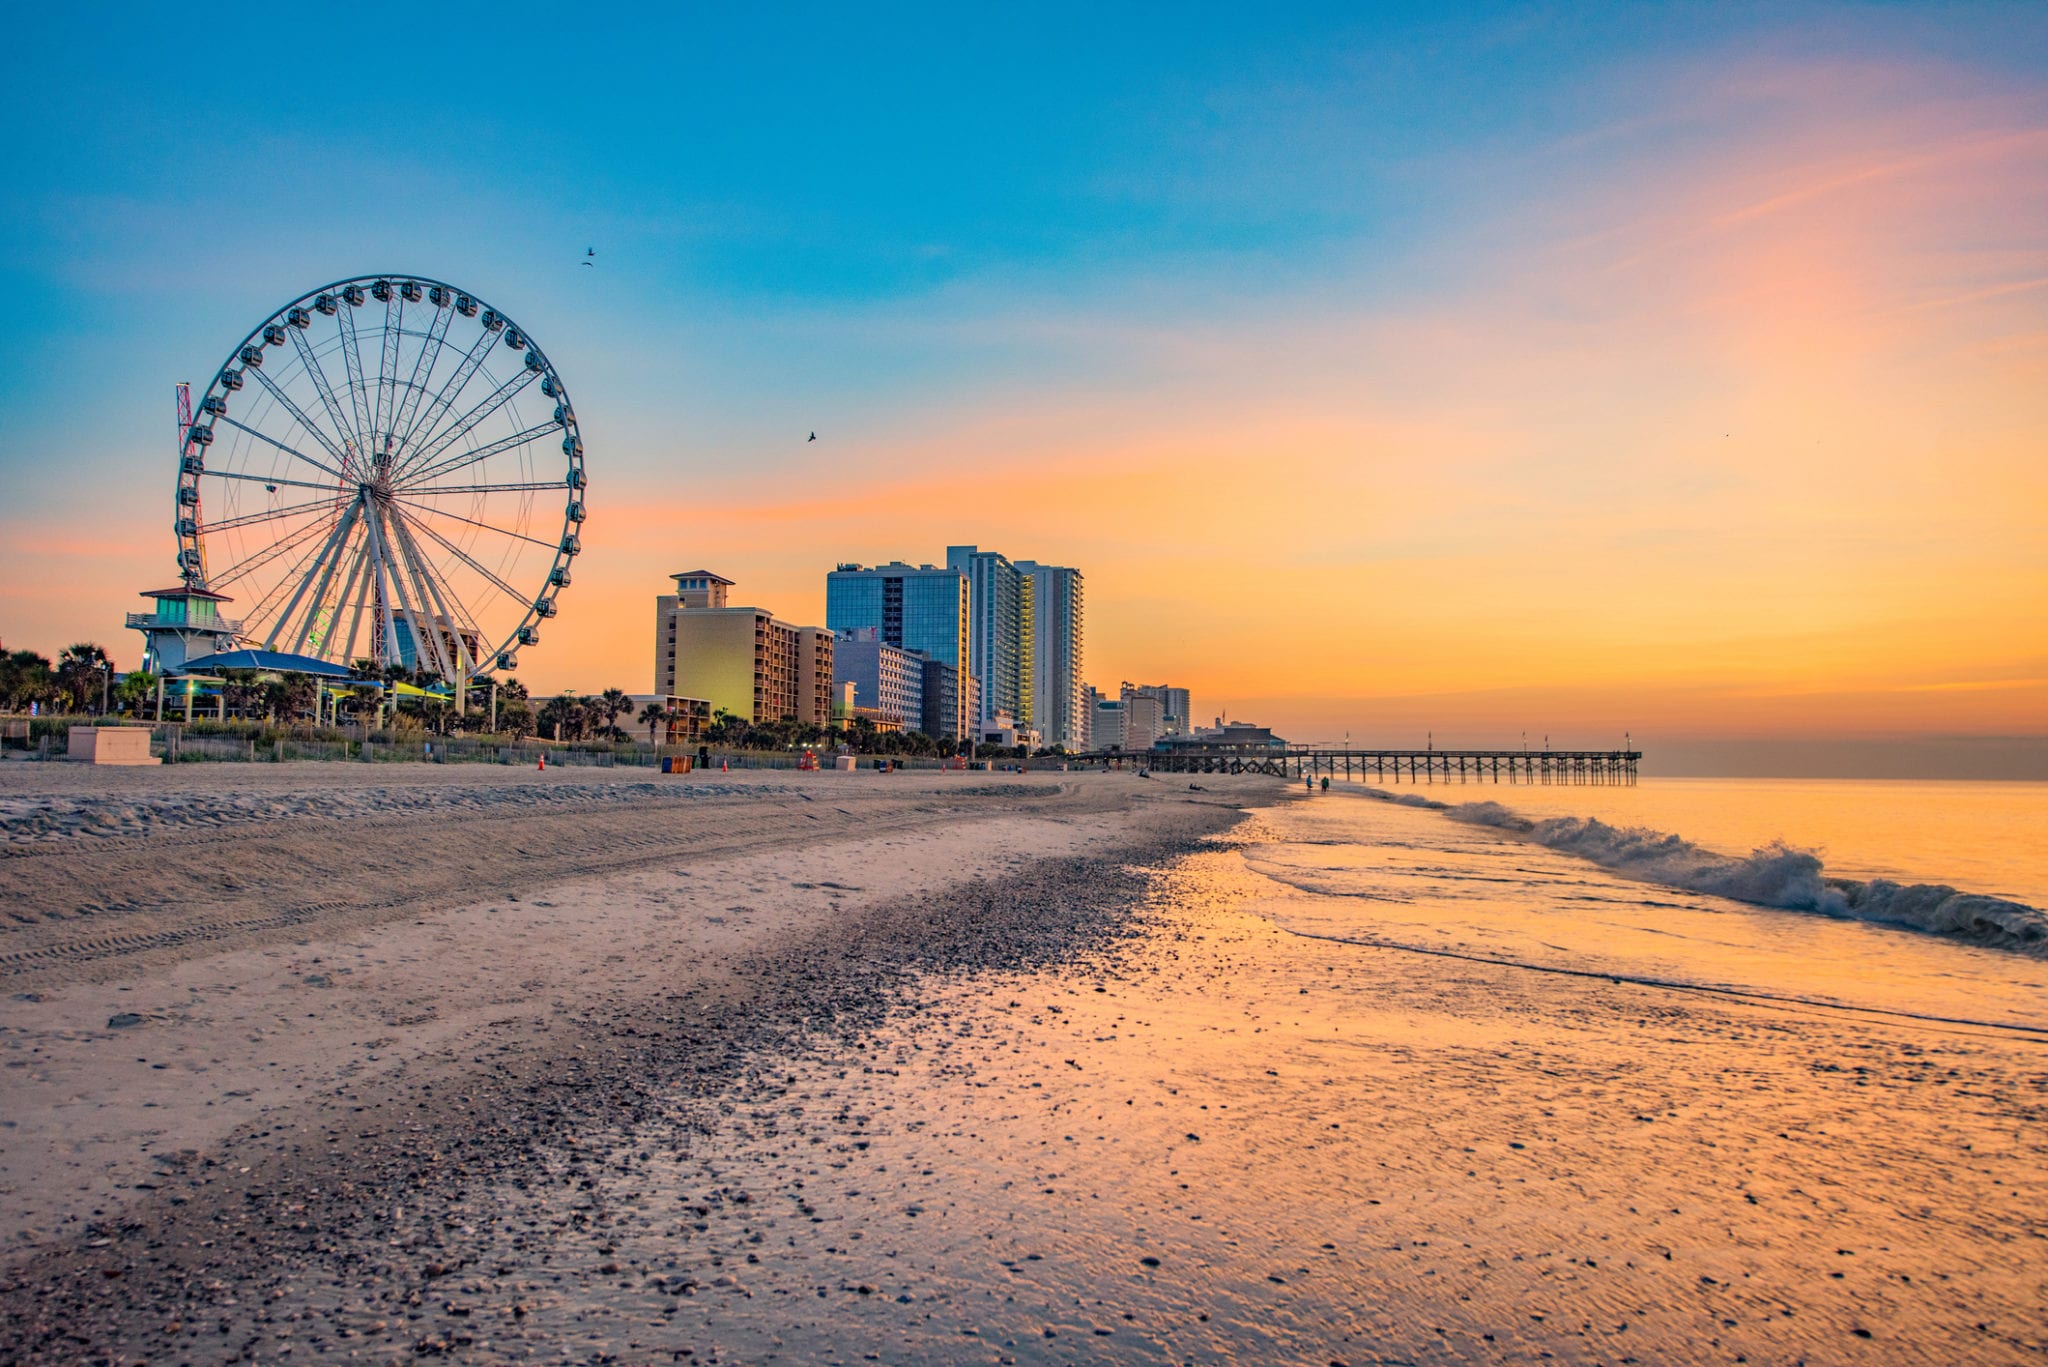 Myrtle beach sites to see